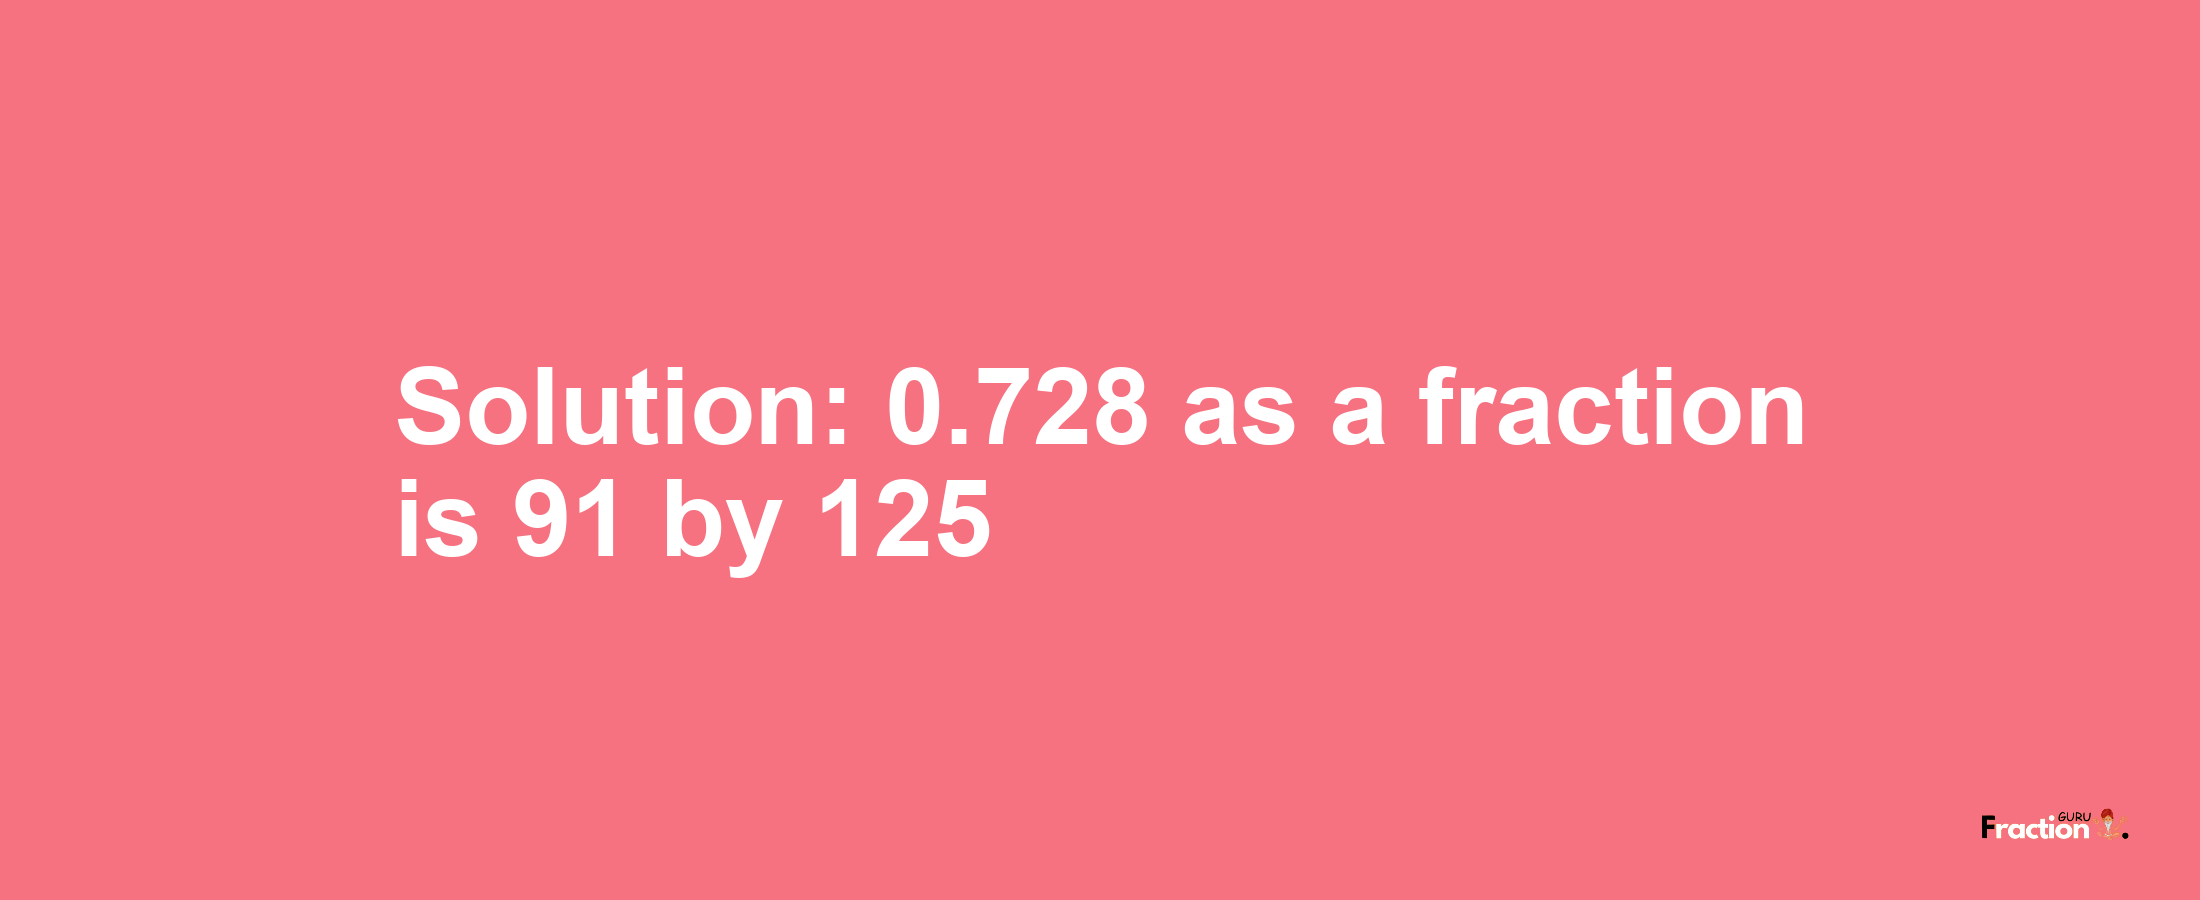 Solution:0.728 as a fraction is 91/125